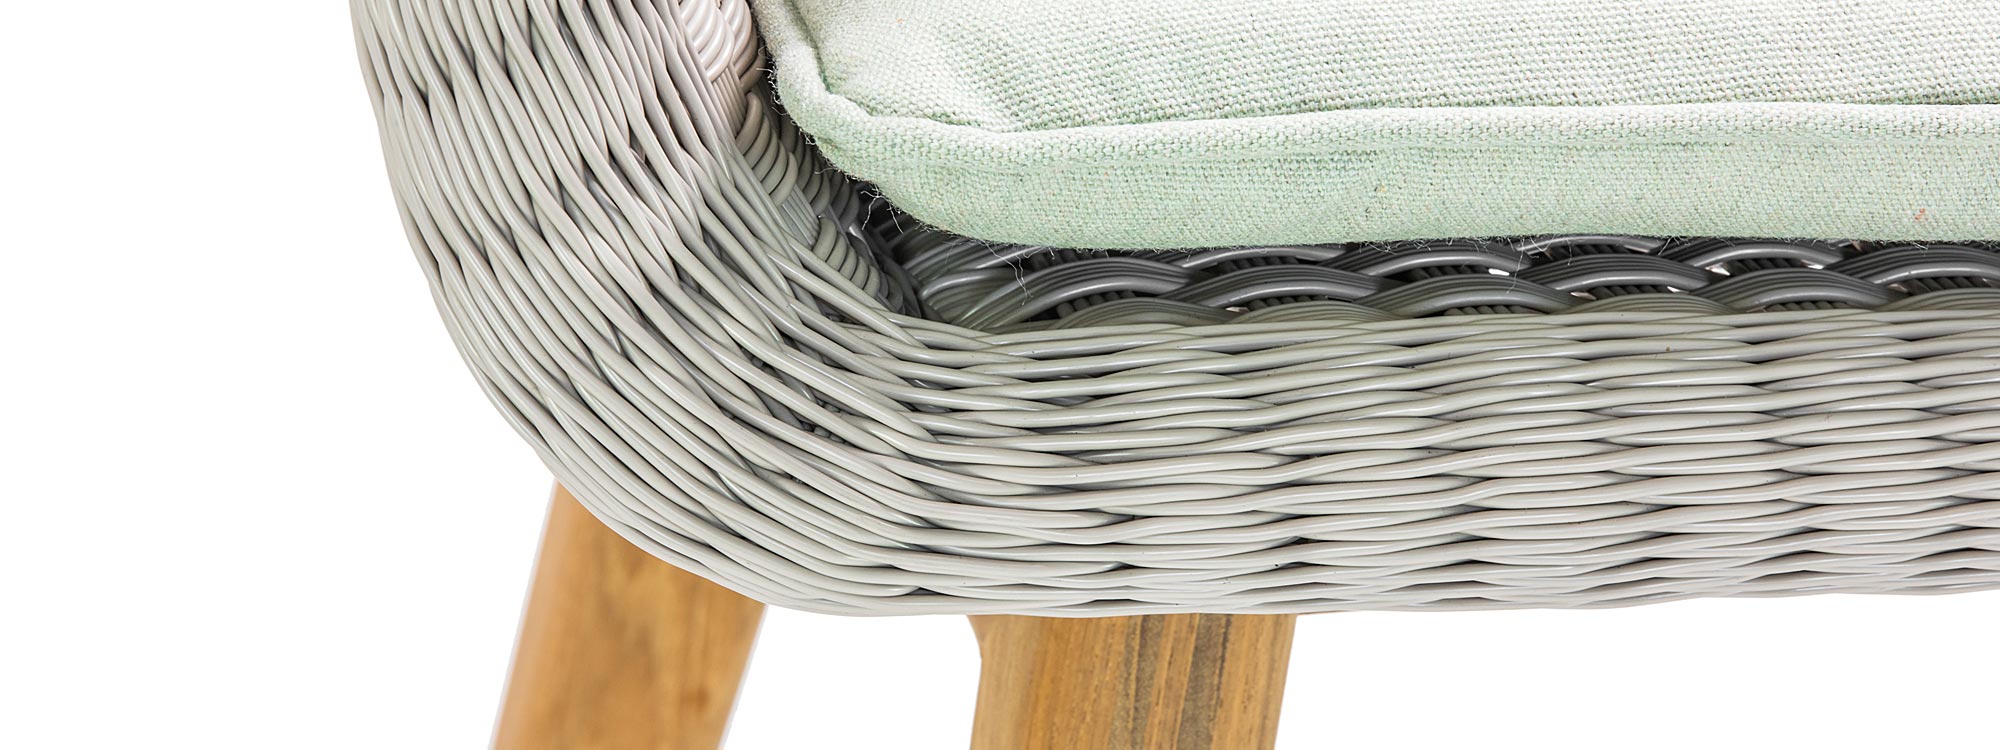 Image of detail of Shell garden chair's Batyline weave seat and teak legs by FueraDentro